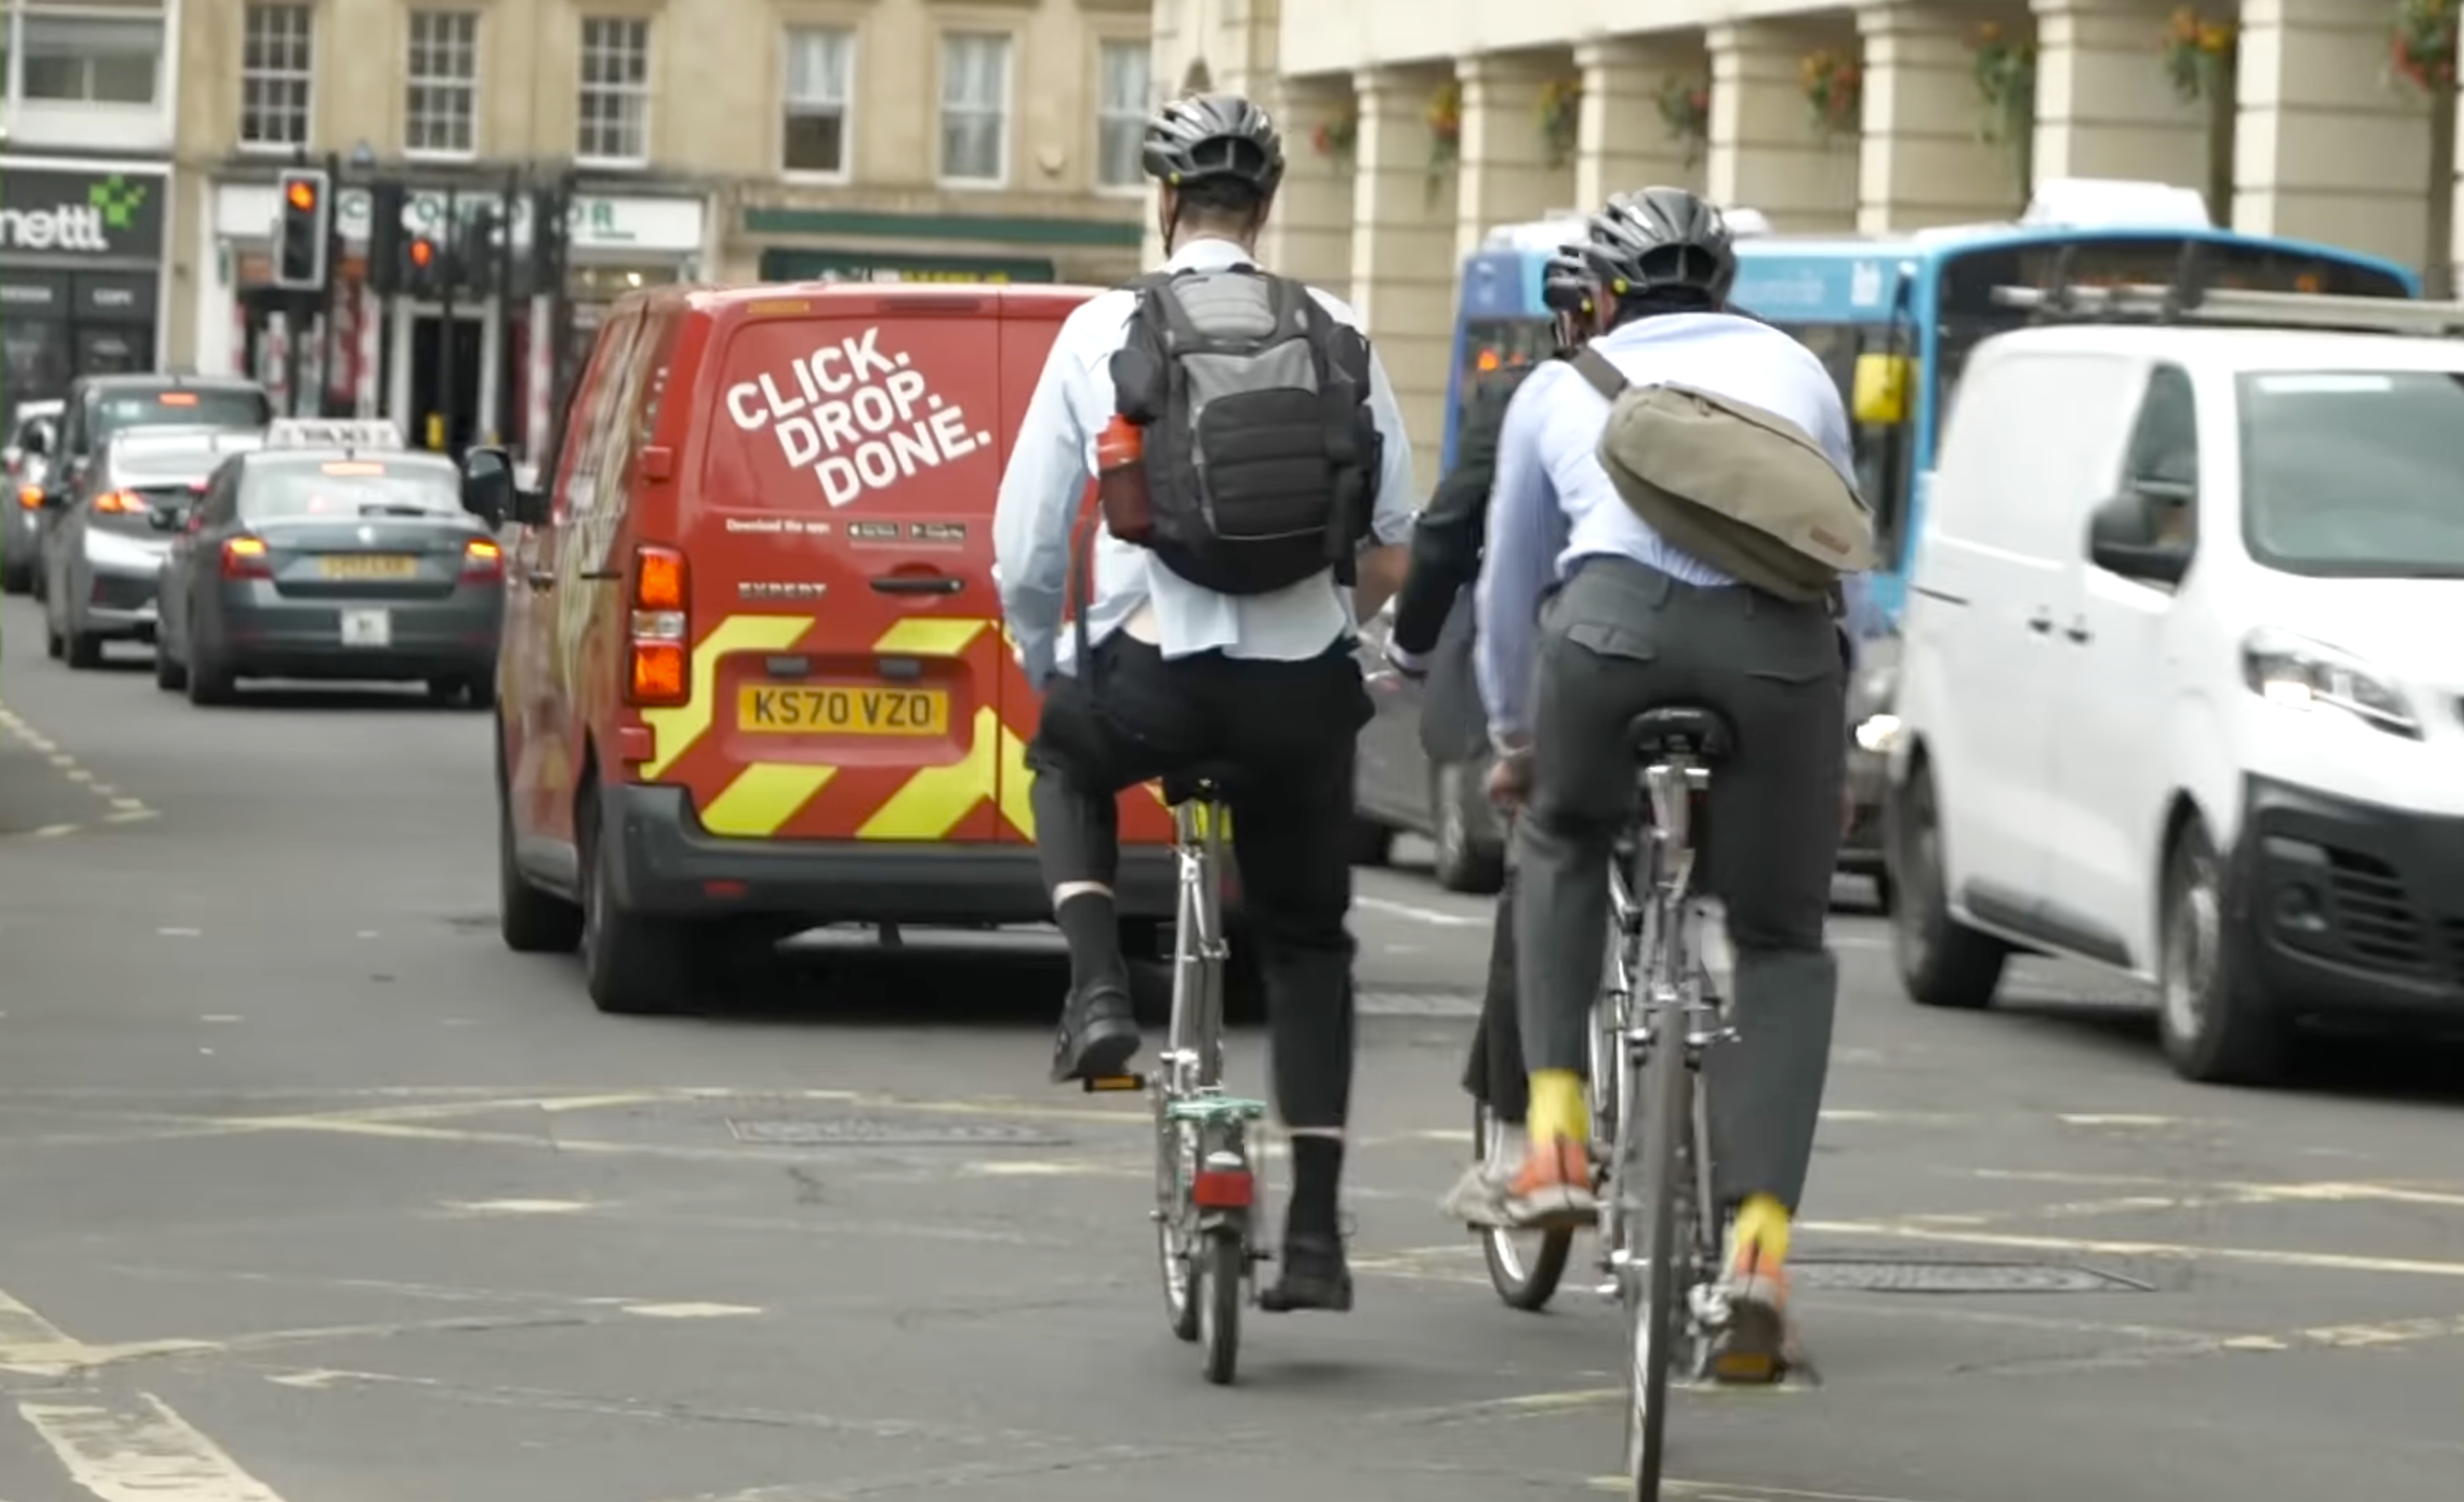 Cycling tips to feel safe riding a bike in traffic